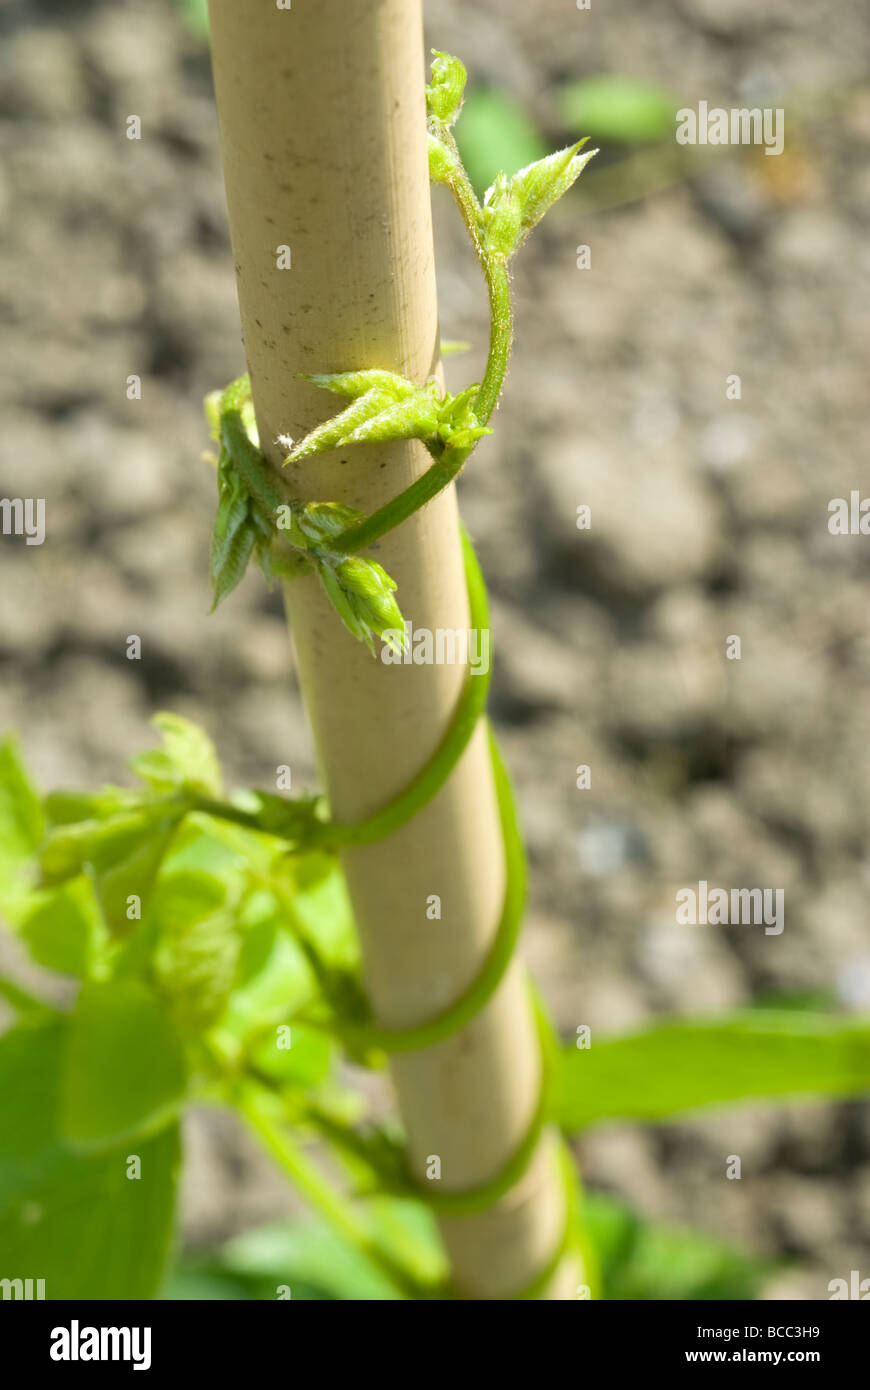 Runner bean (Phaseolus Coccineus) growing up a bamboo cane. Stock Photo